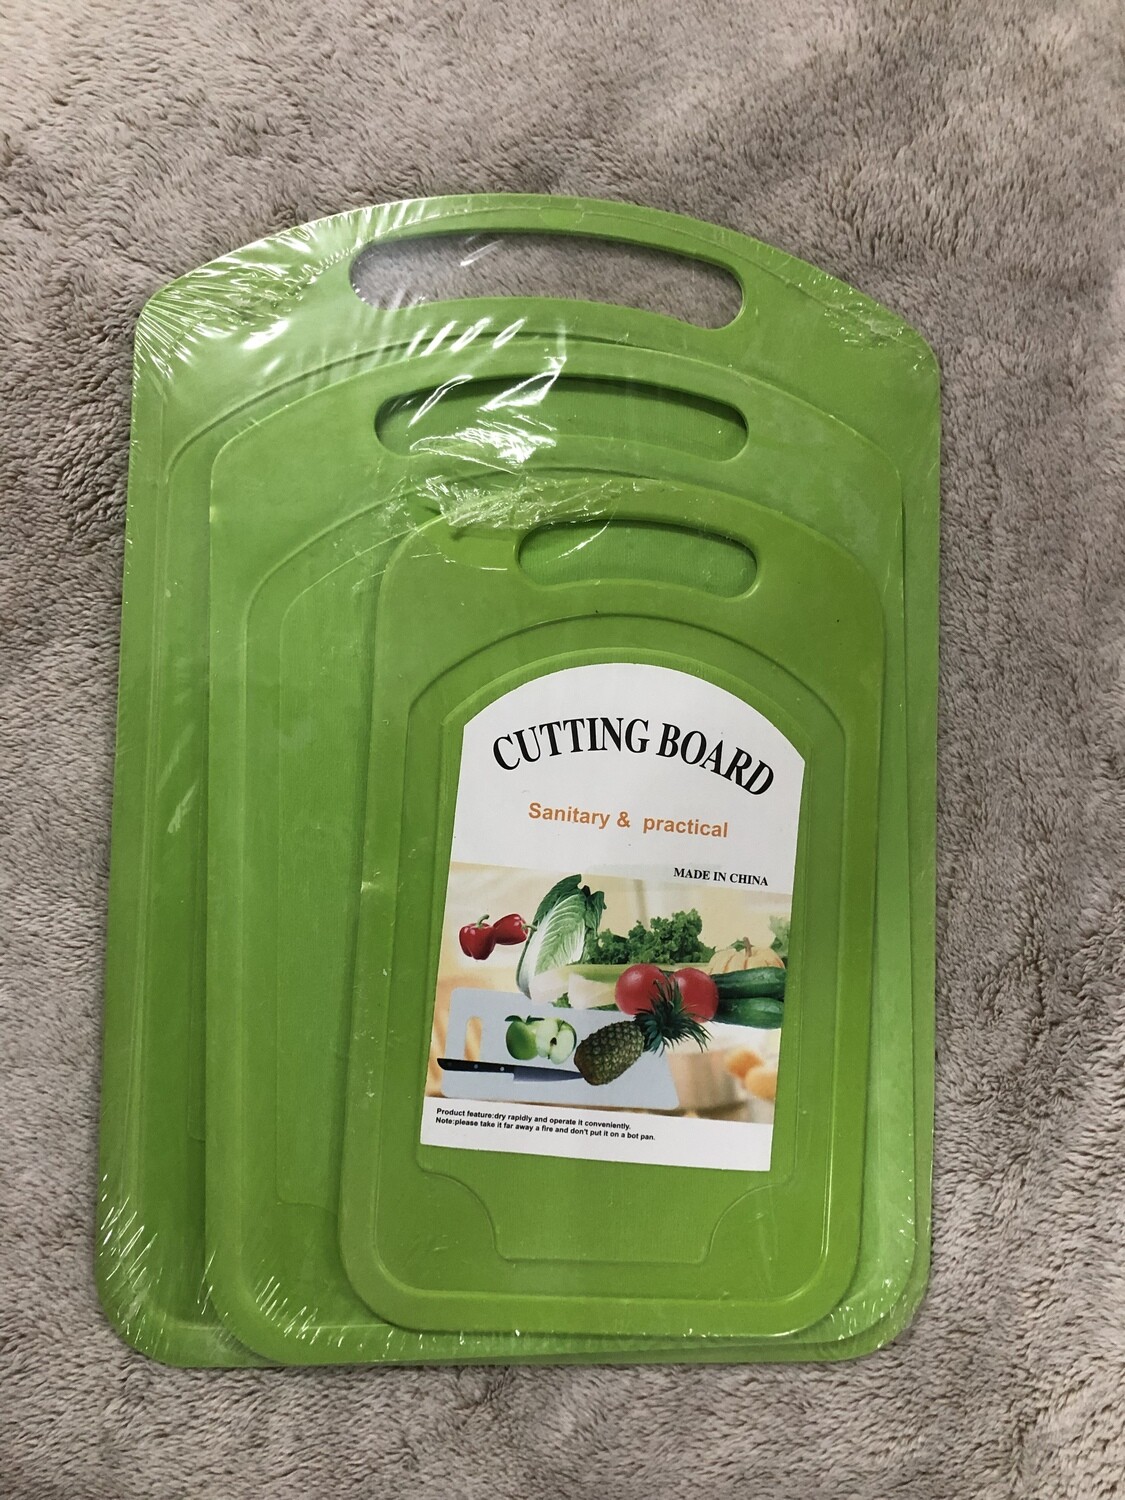 Plastic Chopping board set of 3. L35X24CM/M30x21cm/25x15cm in colors green white yellow.